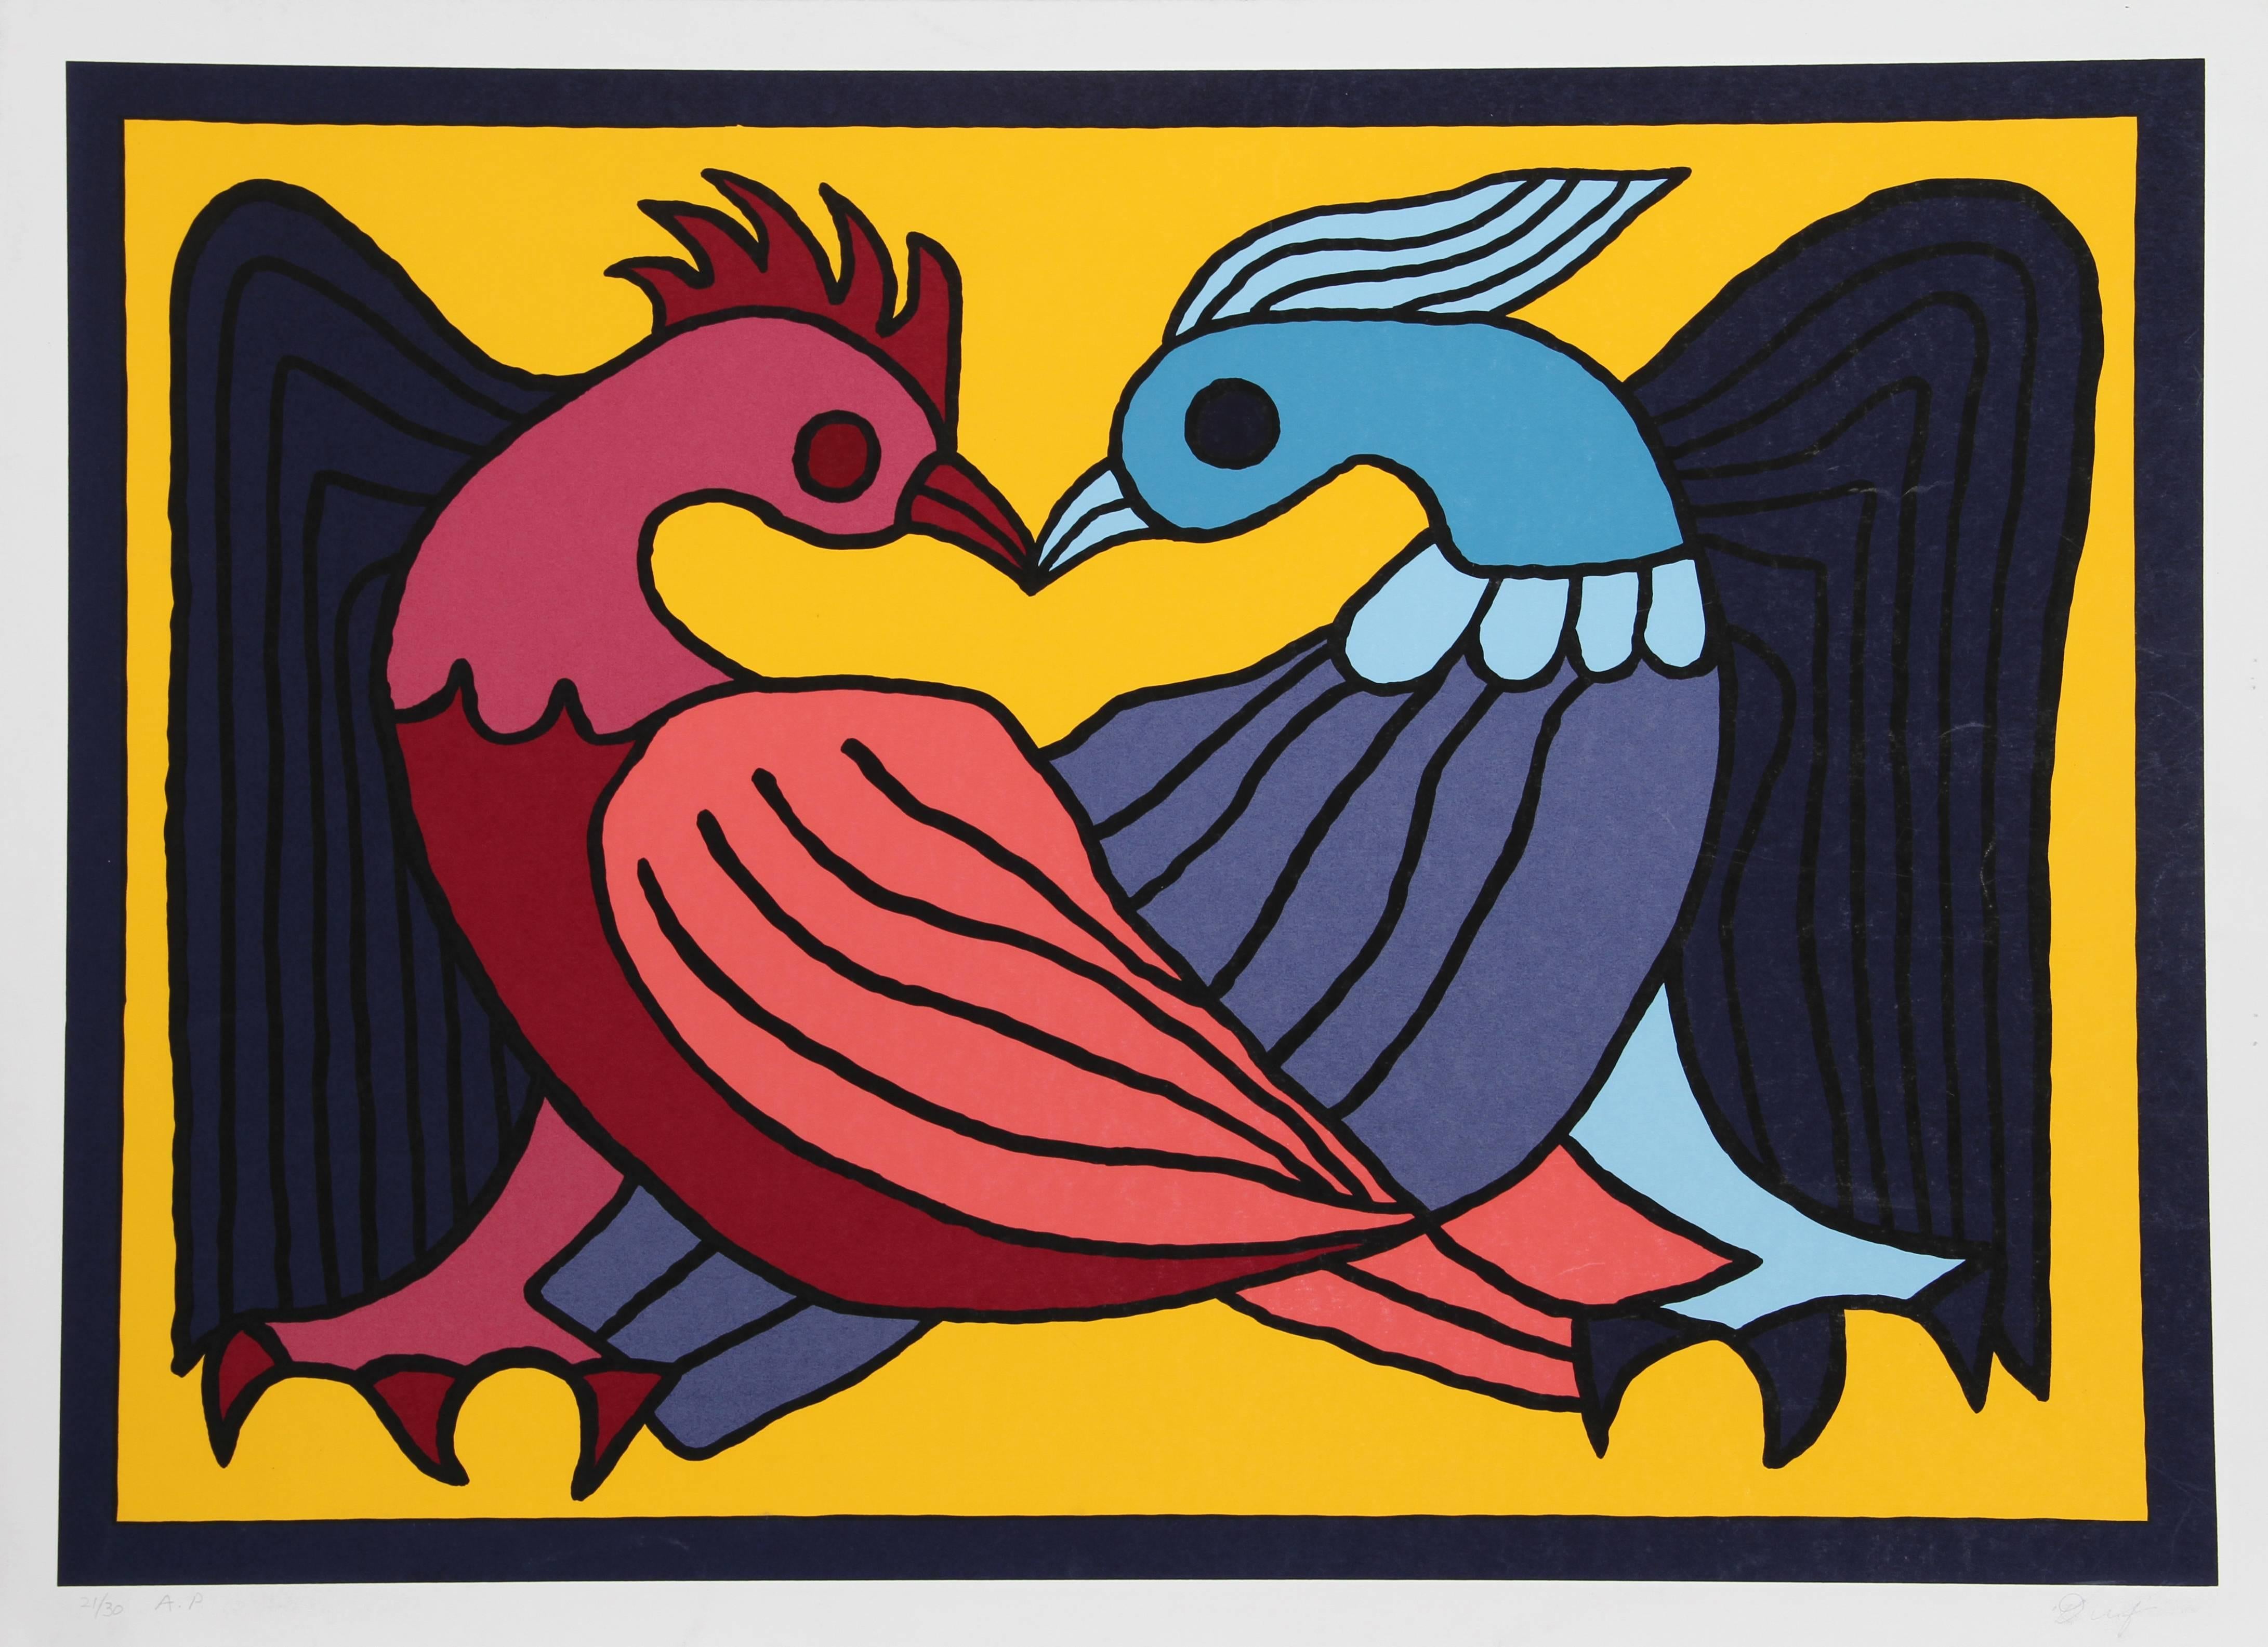 This print was created by Peruvian artist Victor Delfin. Delfin found the source of his inspiration in the ancient Paracan culture of Peru, part of the broader Incan civilization. Delfin's paintings and tapestries of birds reveals the depth of his